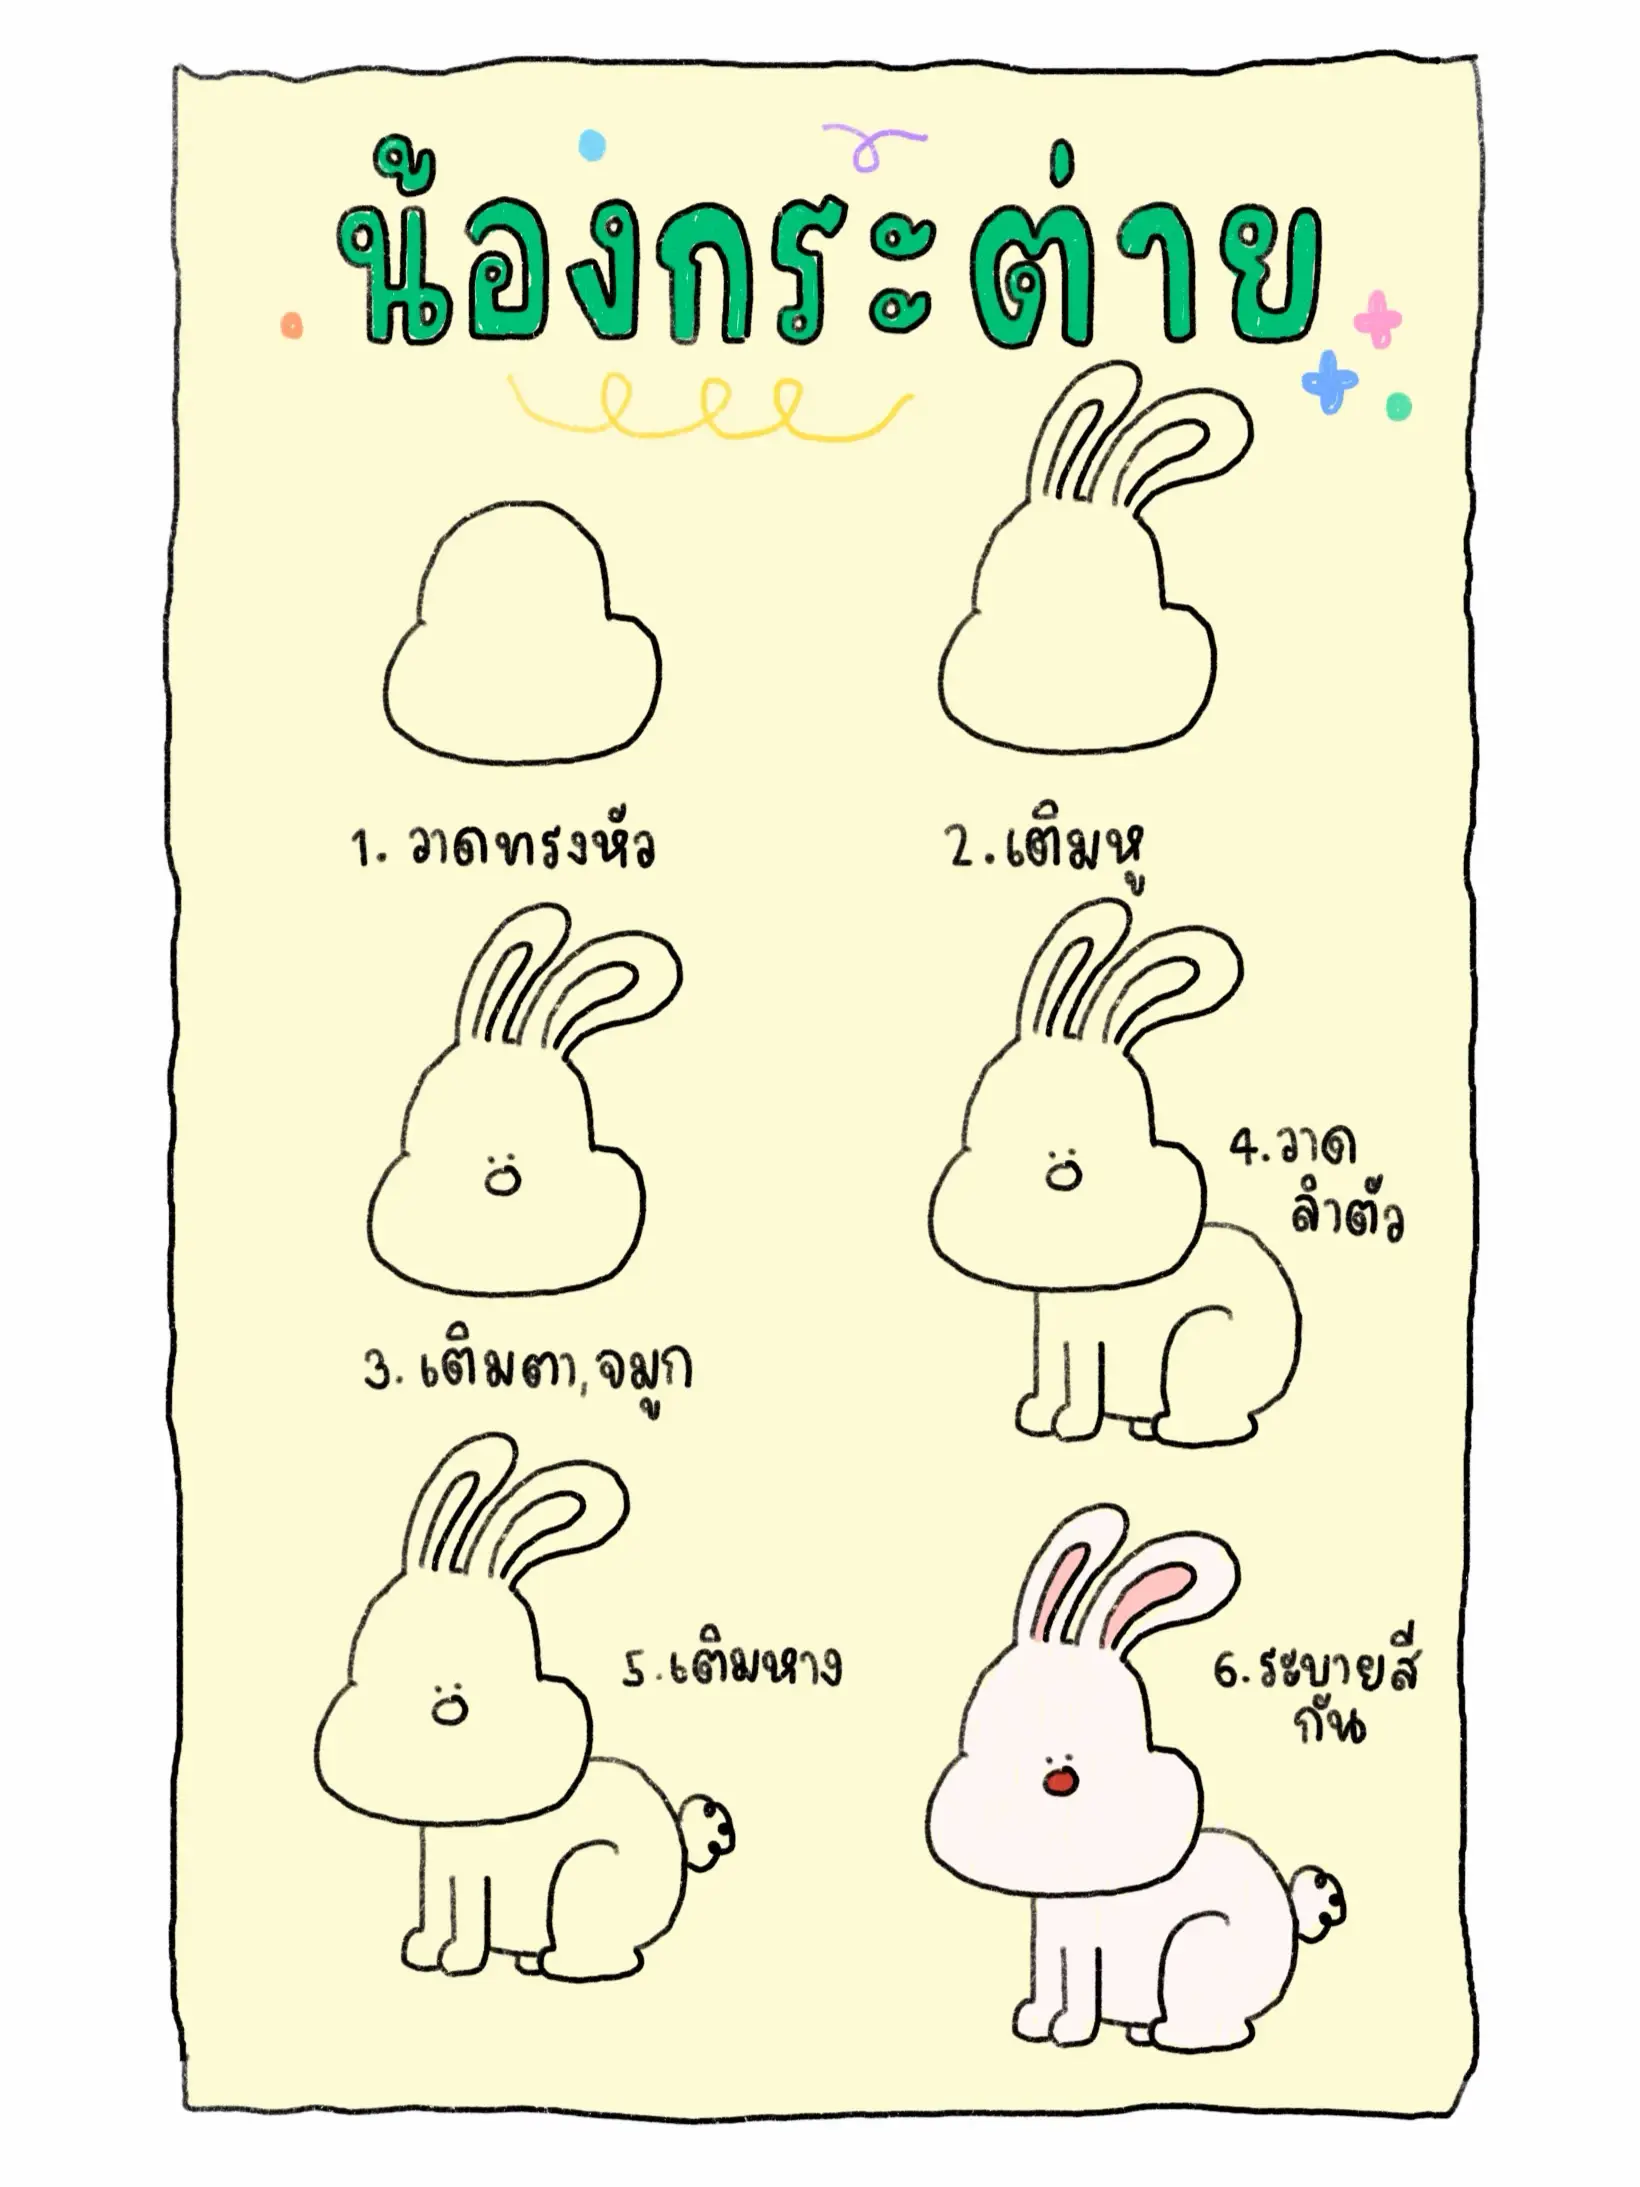 Ria Rabbit Drawing For Kids